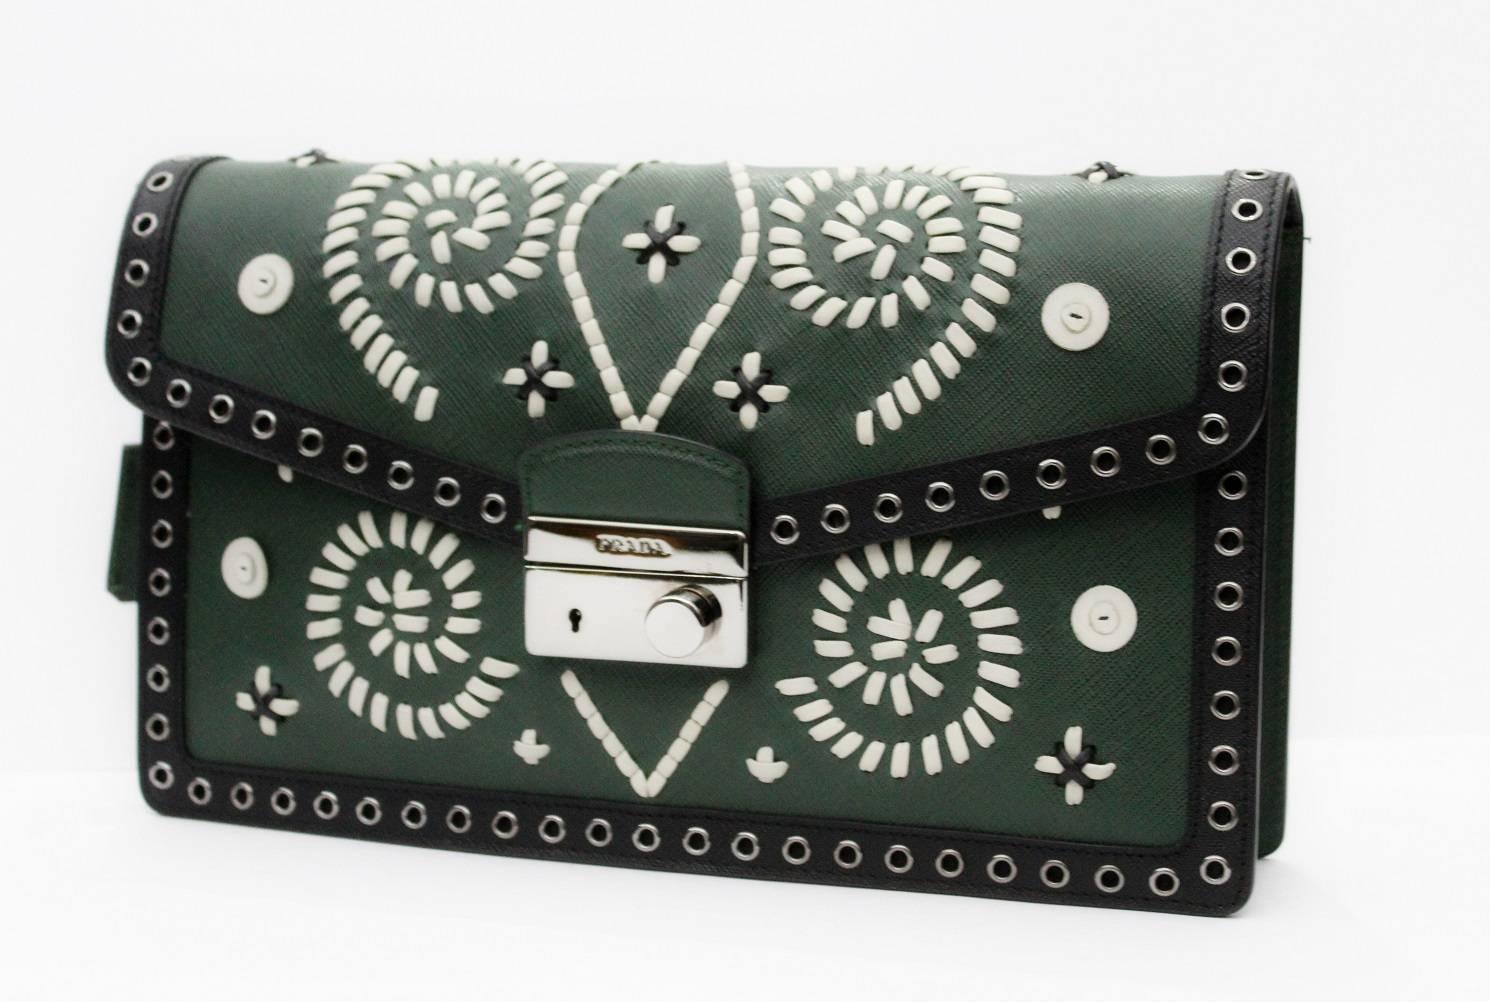 Green and Black Saffiano leather Prada clutch with silver-tone steel hardware, grommet and white embroidered accents, black leather lining.
